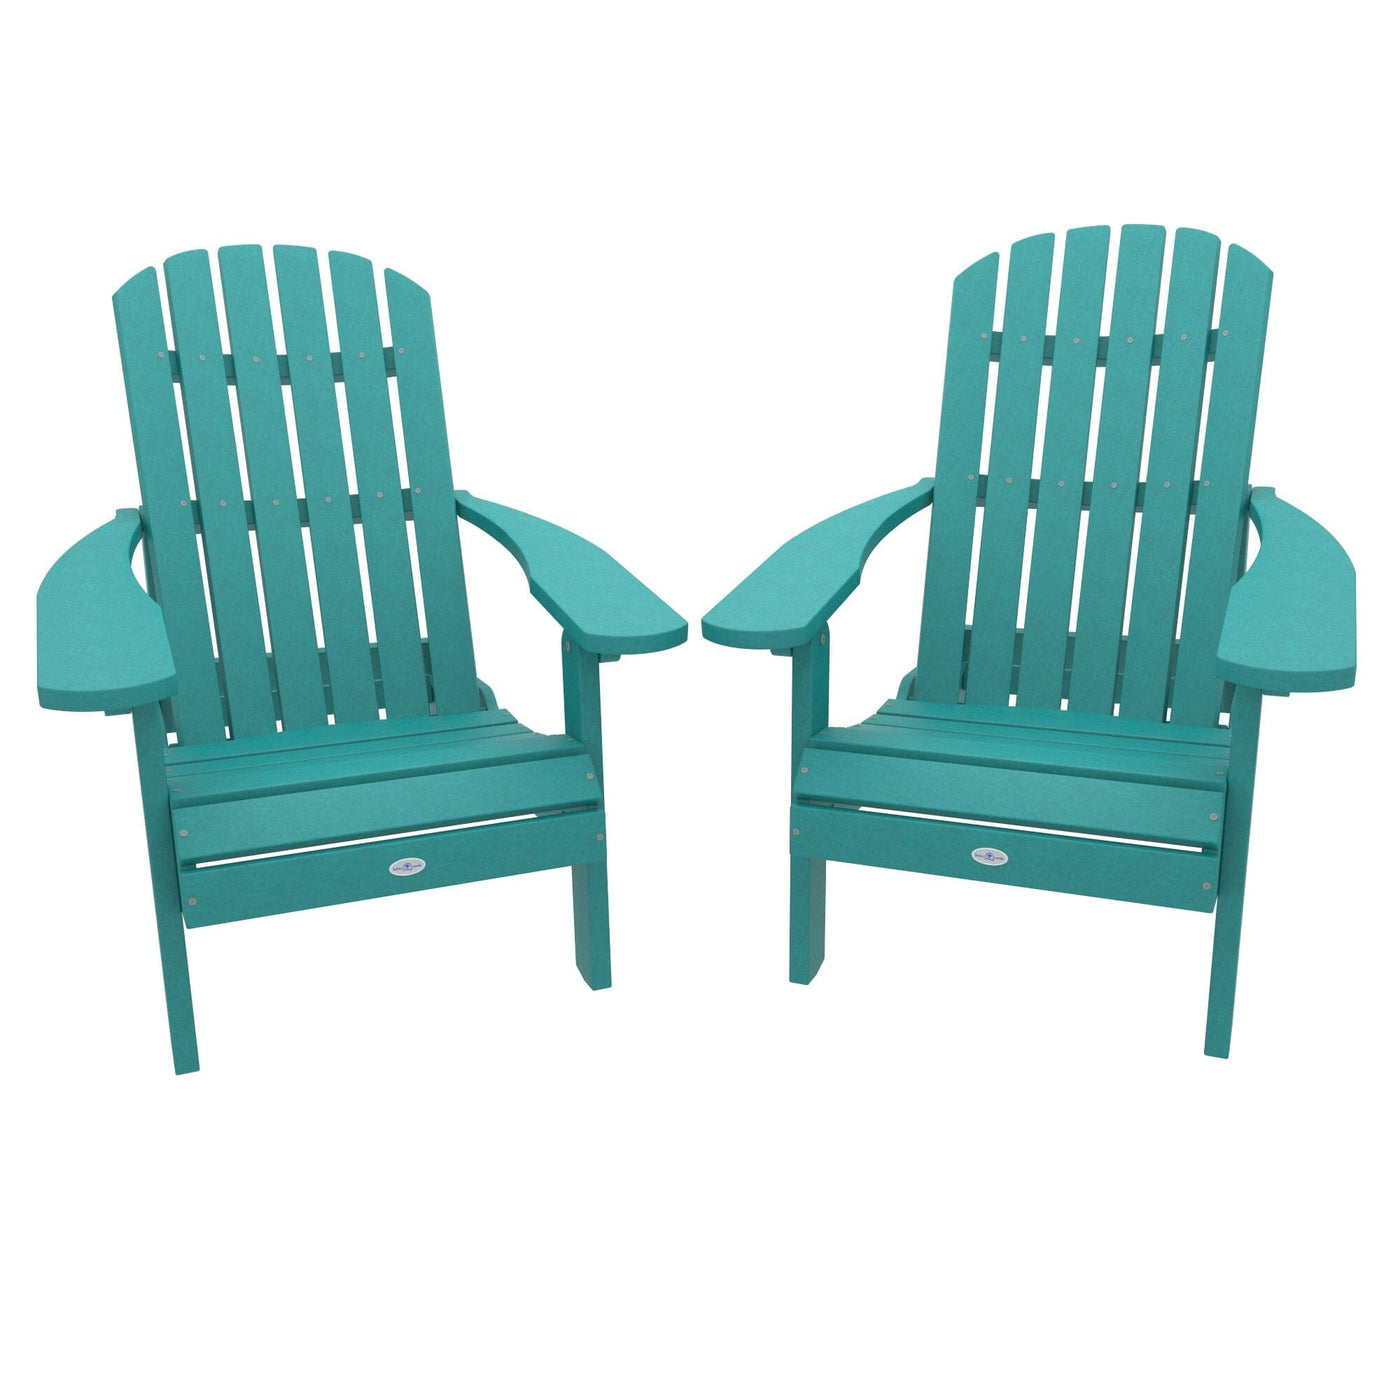 Cape Folding and Reclining Adirondack Chair (Set of 2) Kitted Set Bahia Verde Outdoors Seaglass Blue 